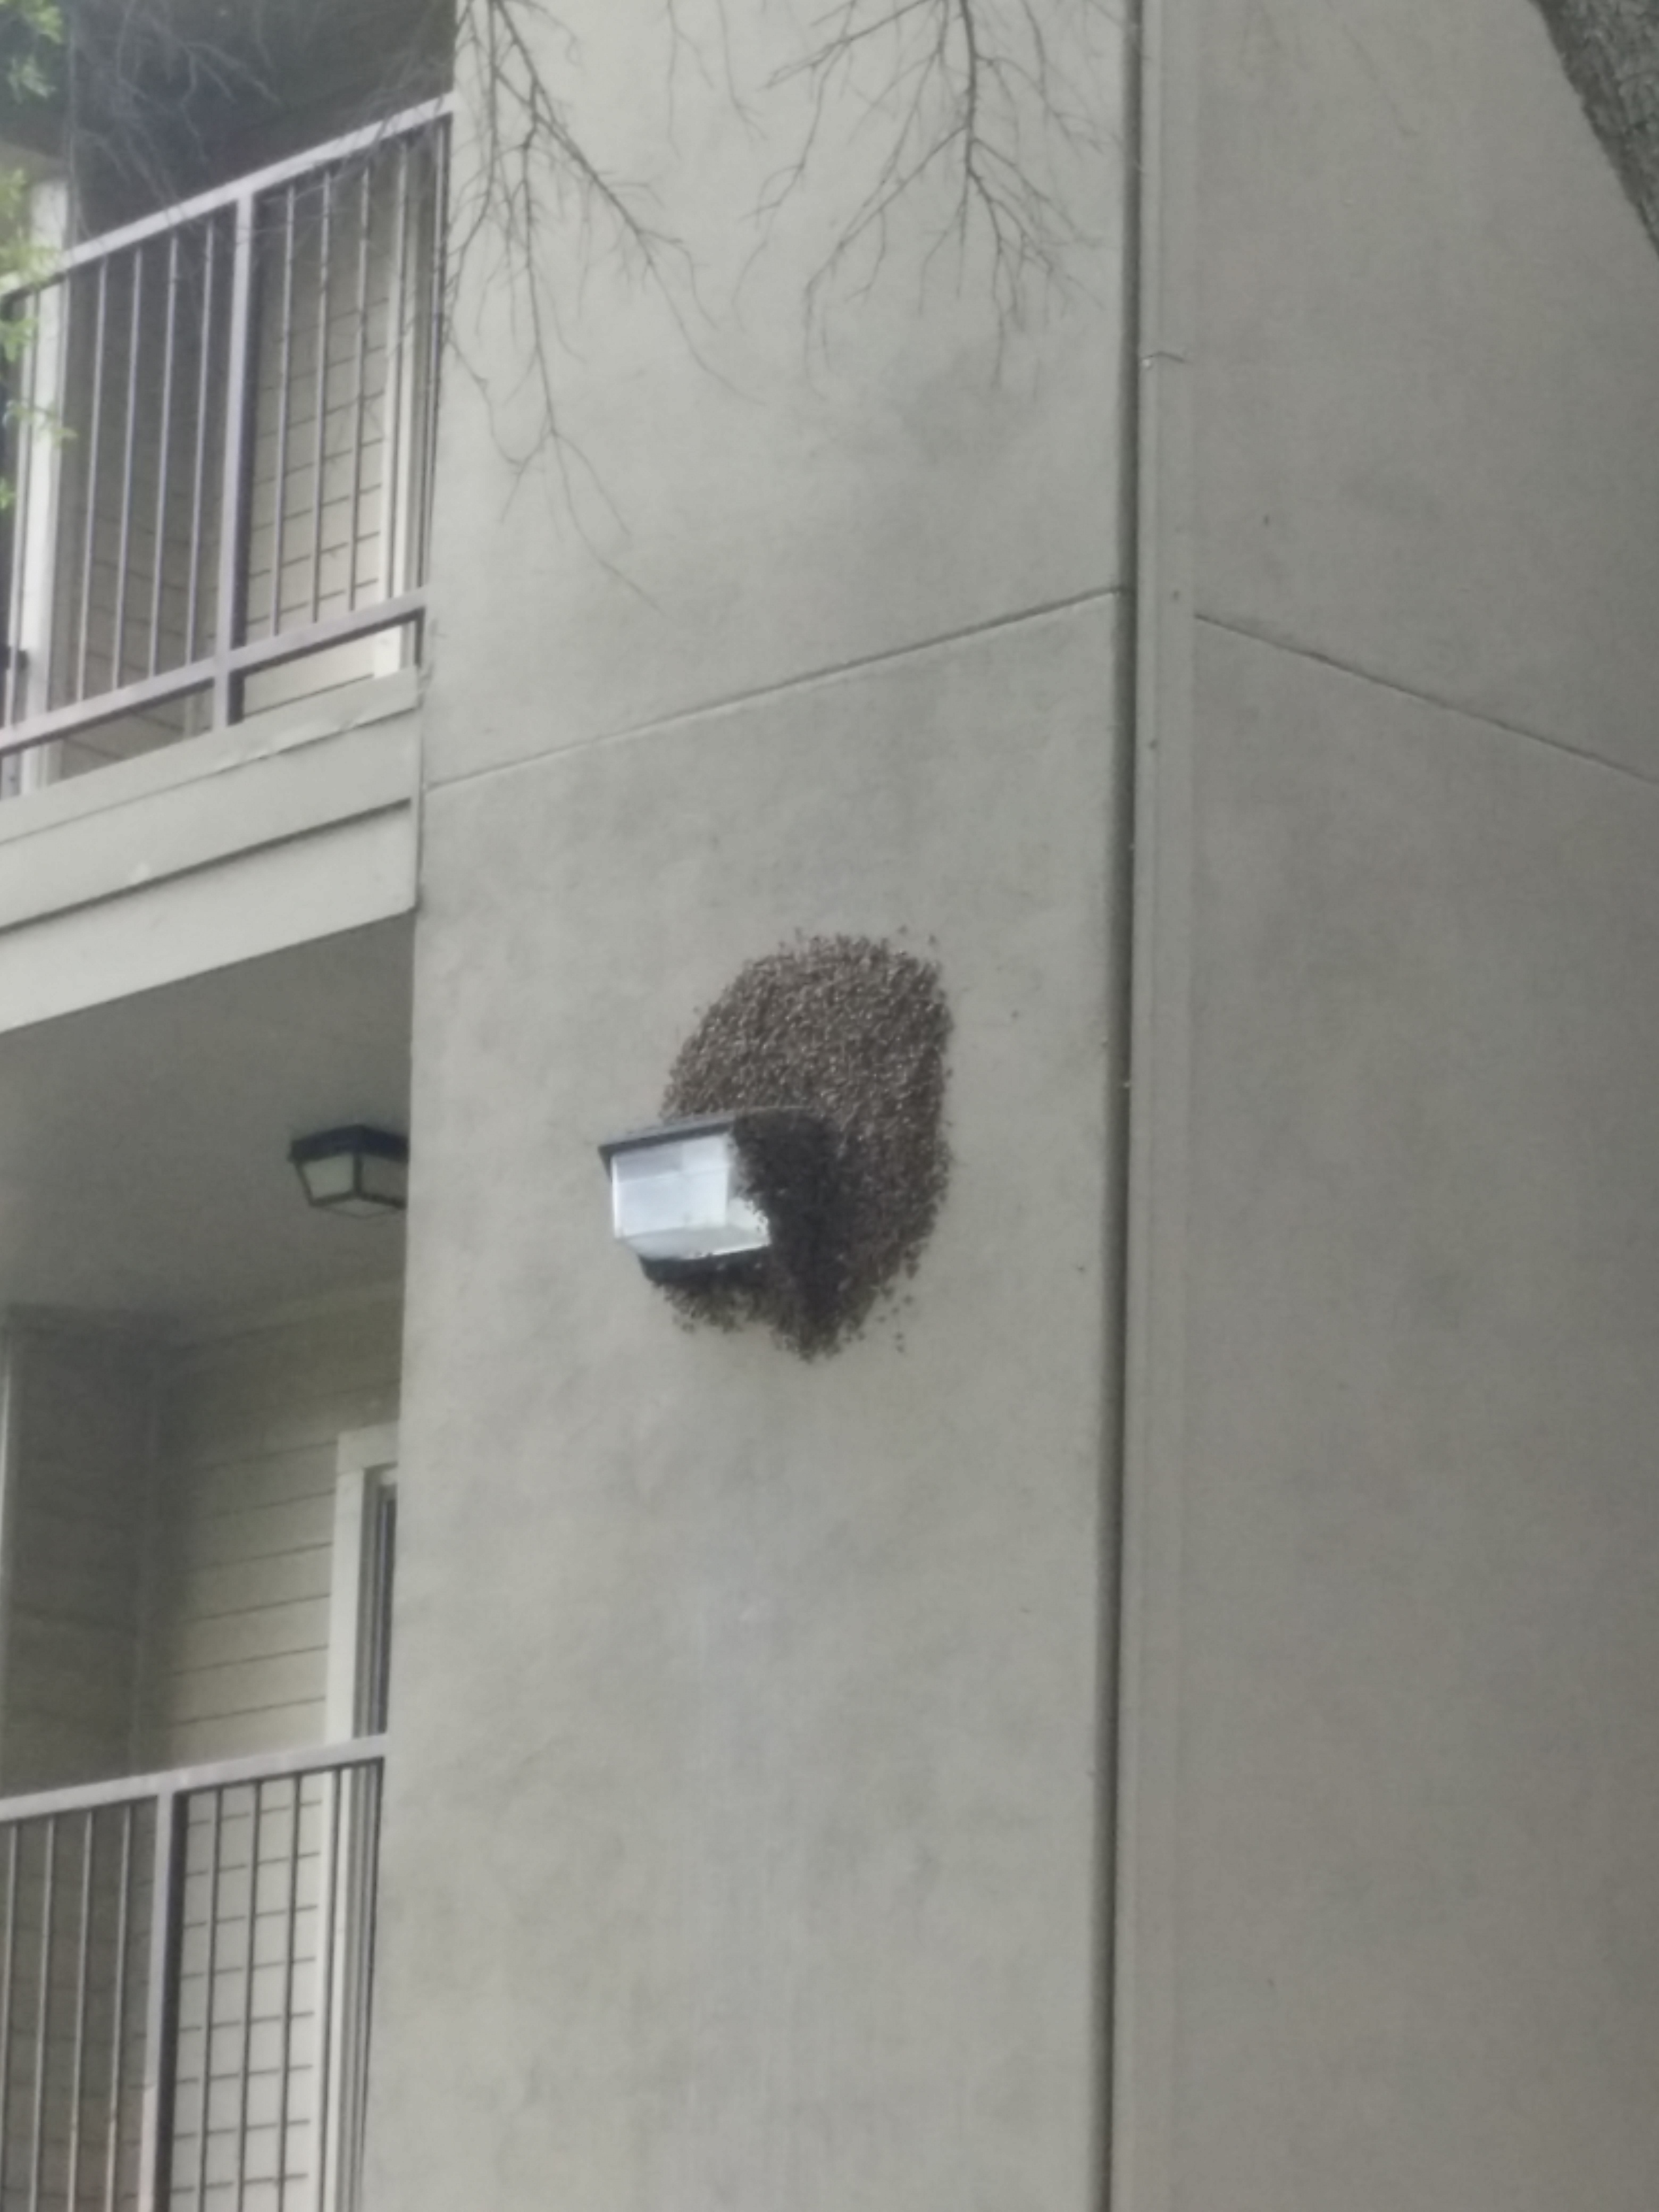 Bees cause buzz at on campus apartments